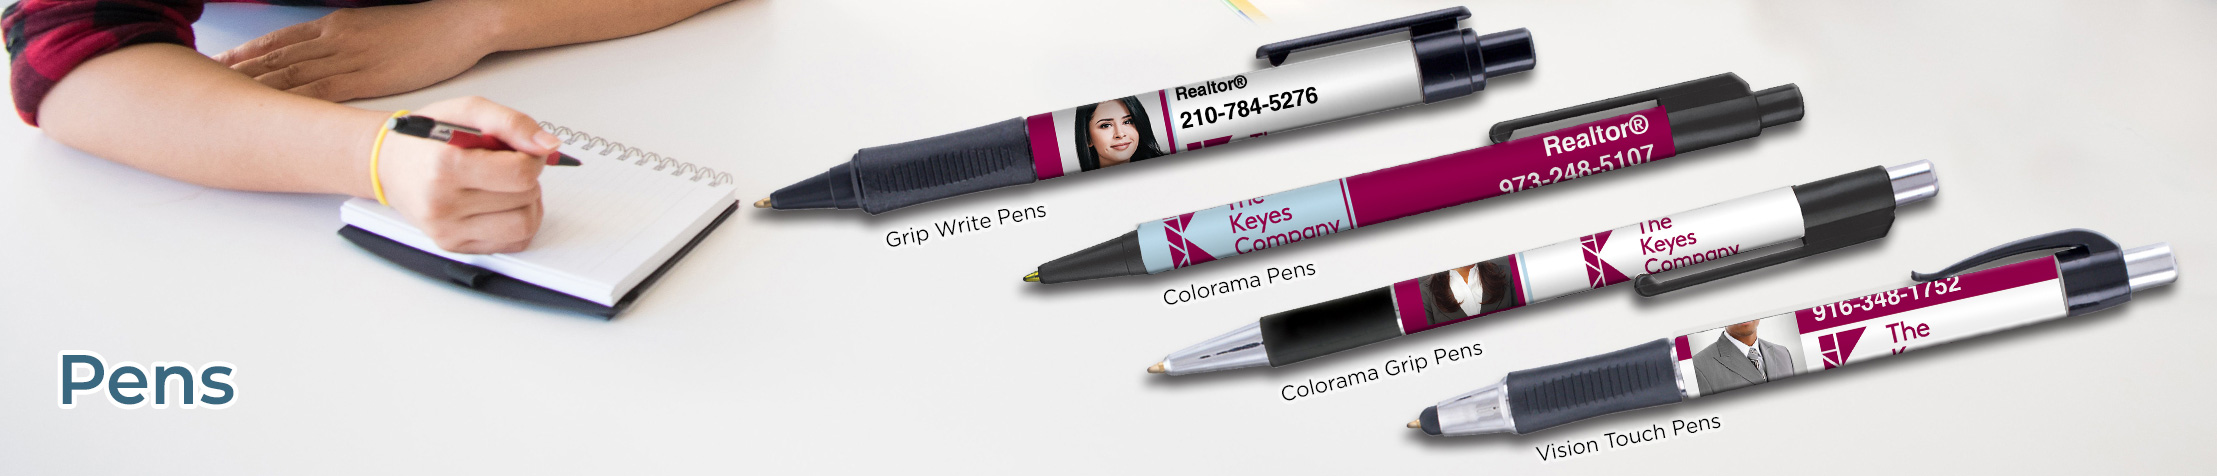 The Keyes Company Real Estate Personalized Pens - promotional products: Grip Write Pens, Colorama Pens, Vision Touch Pens, and Colorama Grip Pens | BestPrintBuy.com